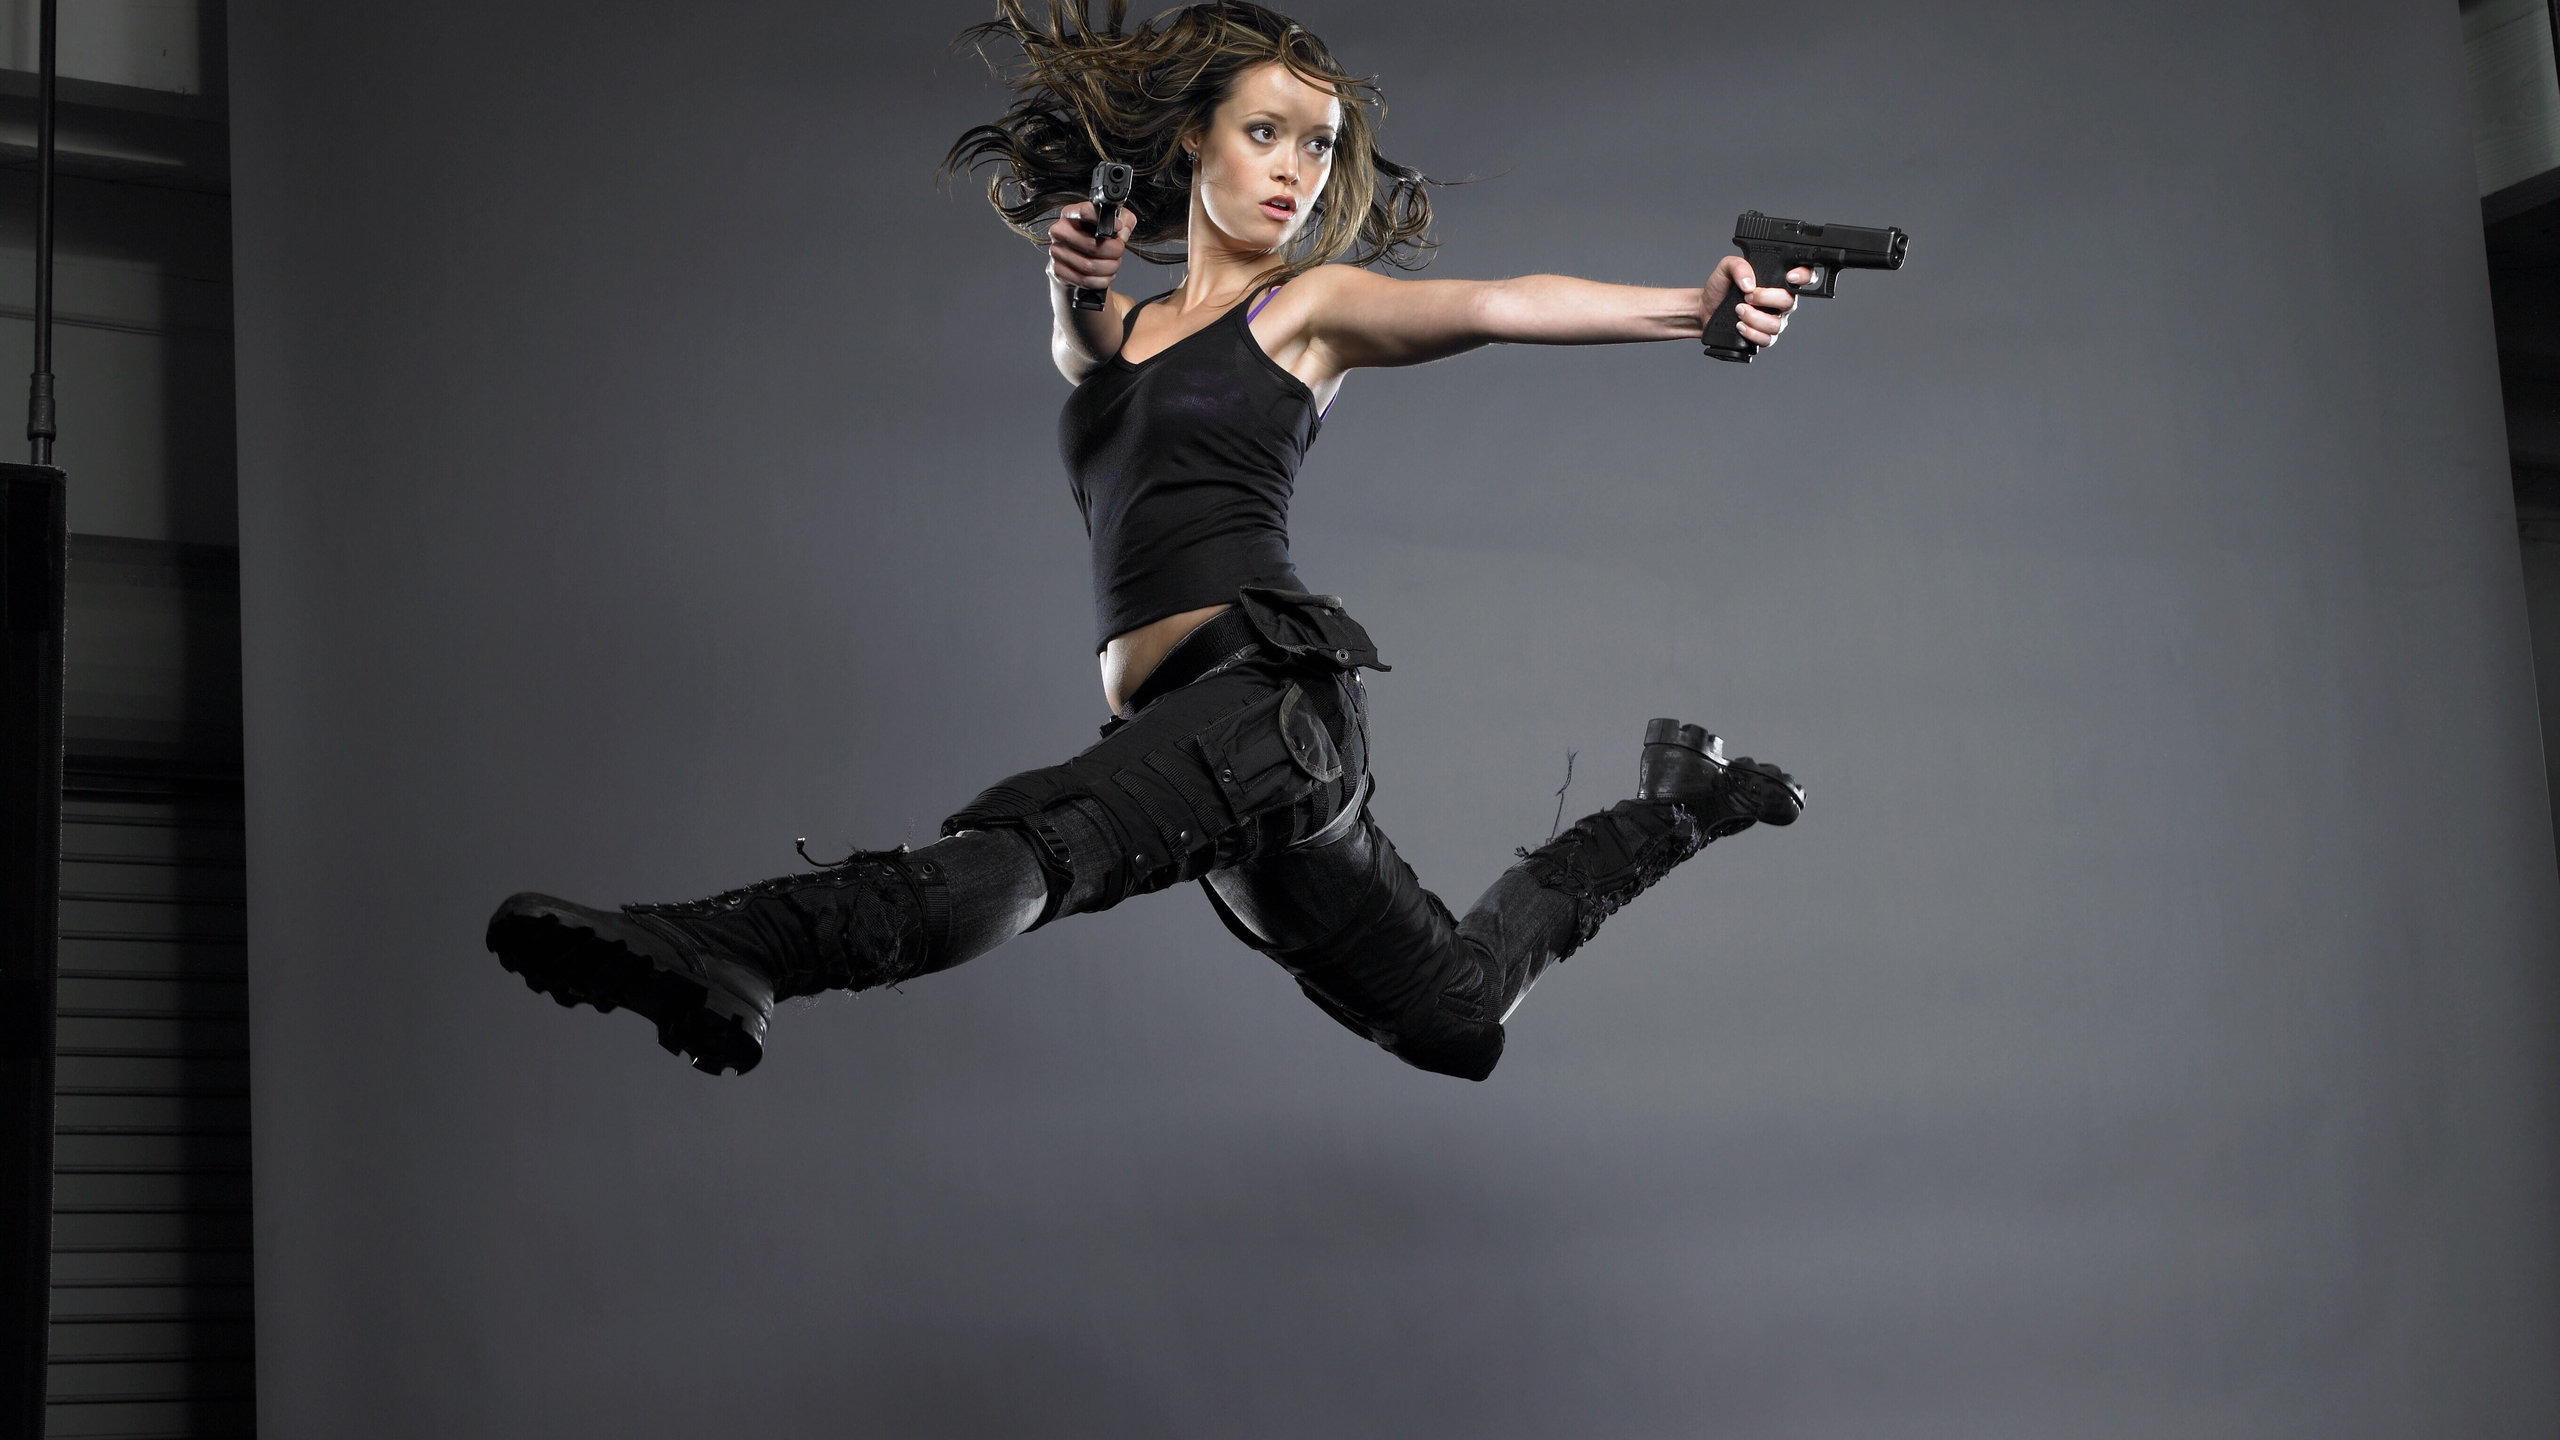 Summer Glau With Guns for 2560x1440 HDTV resolution